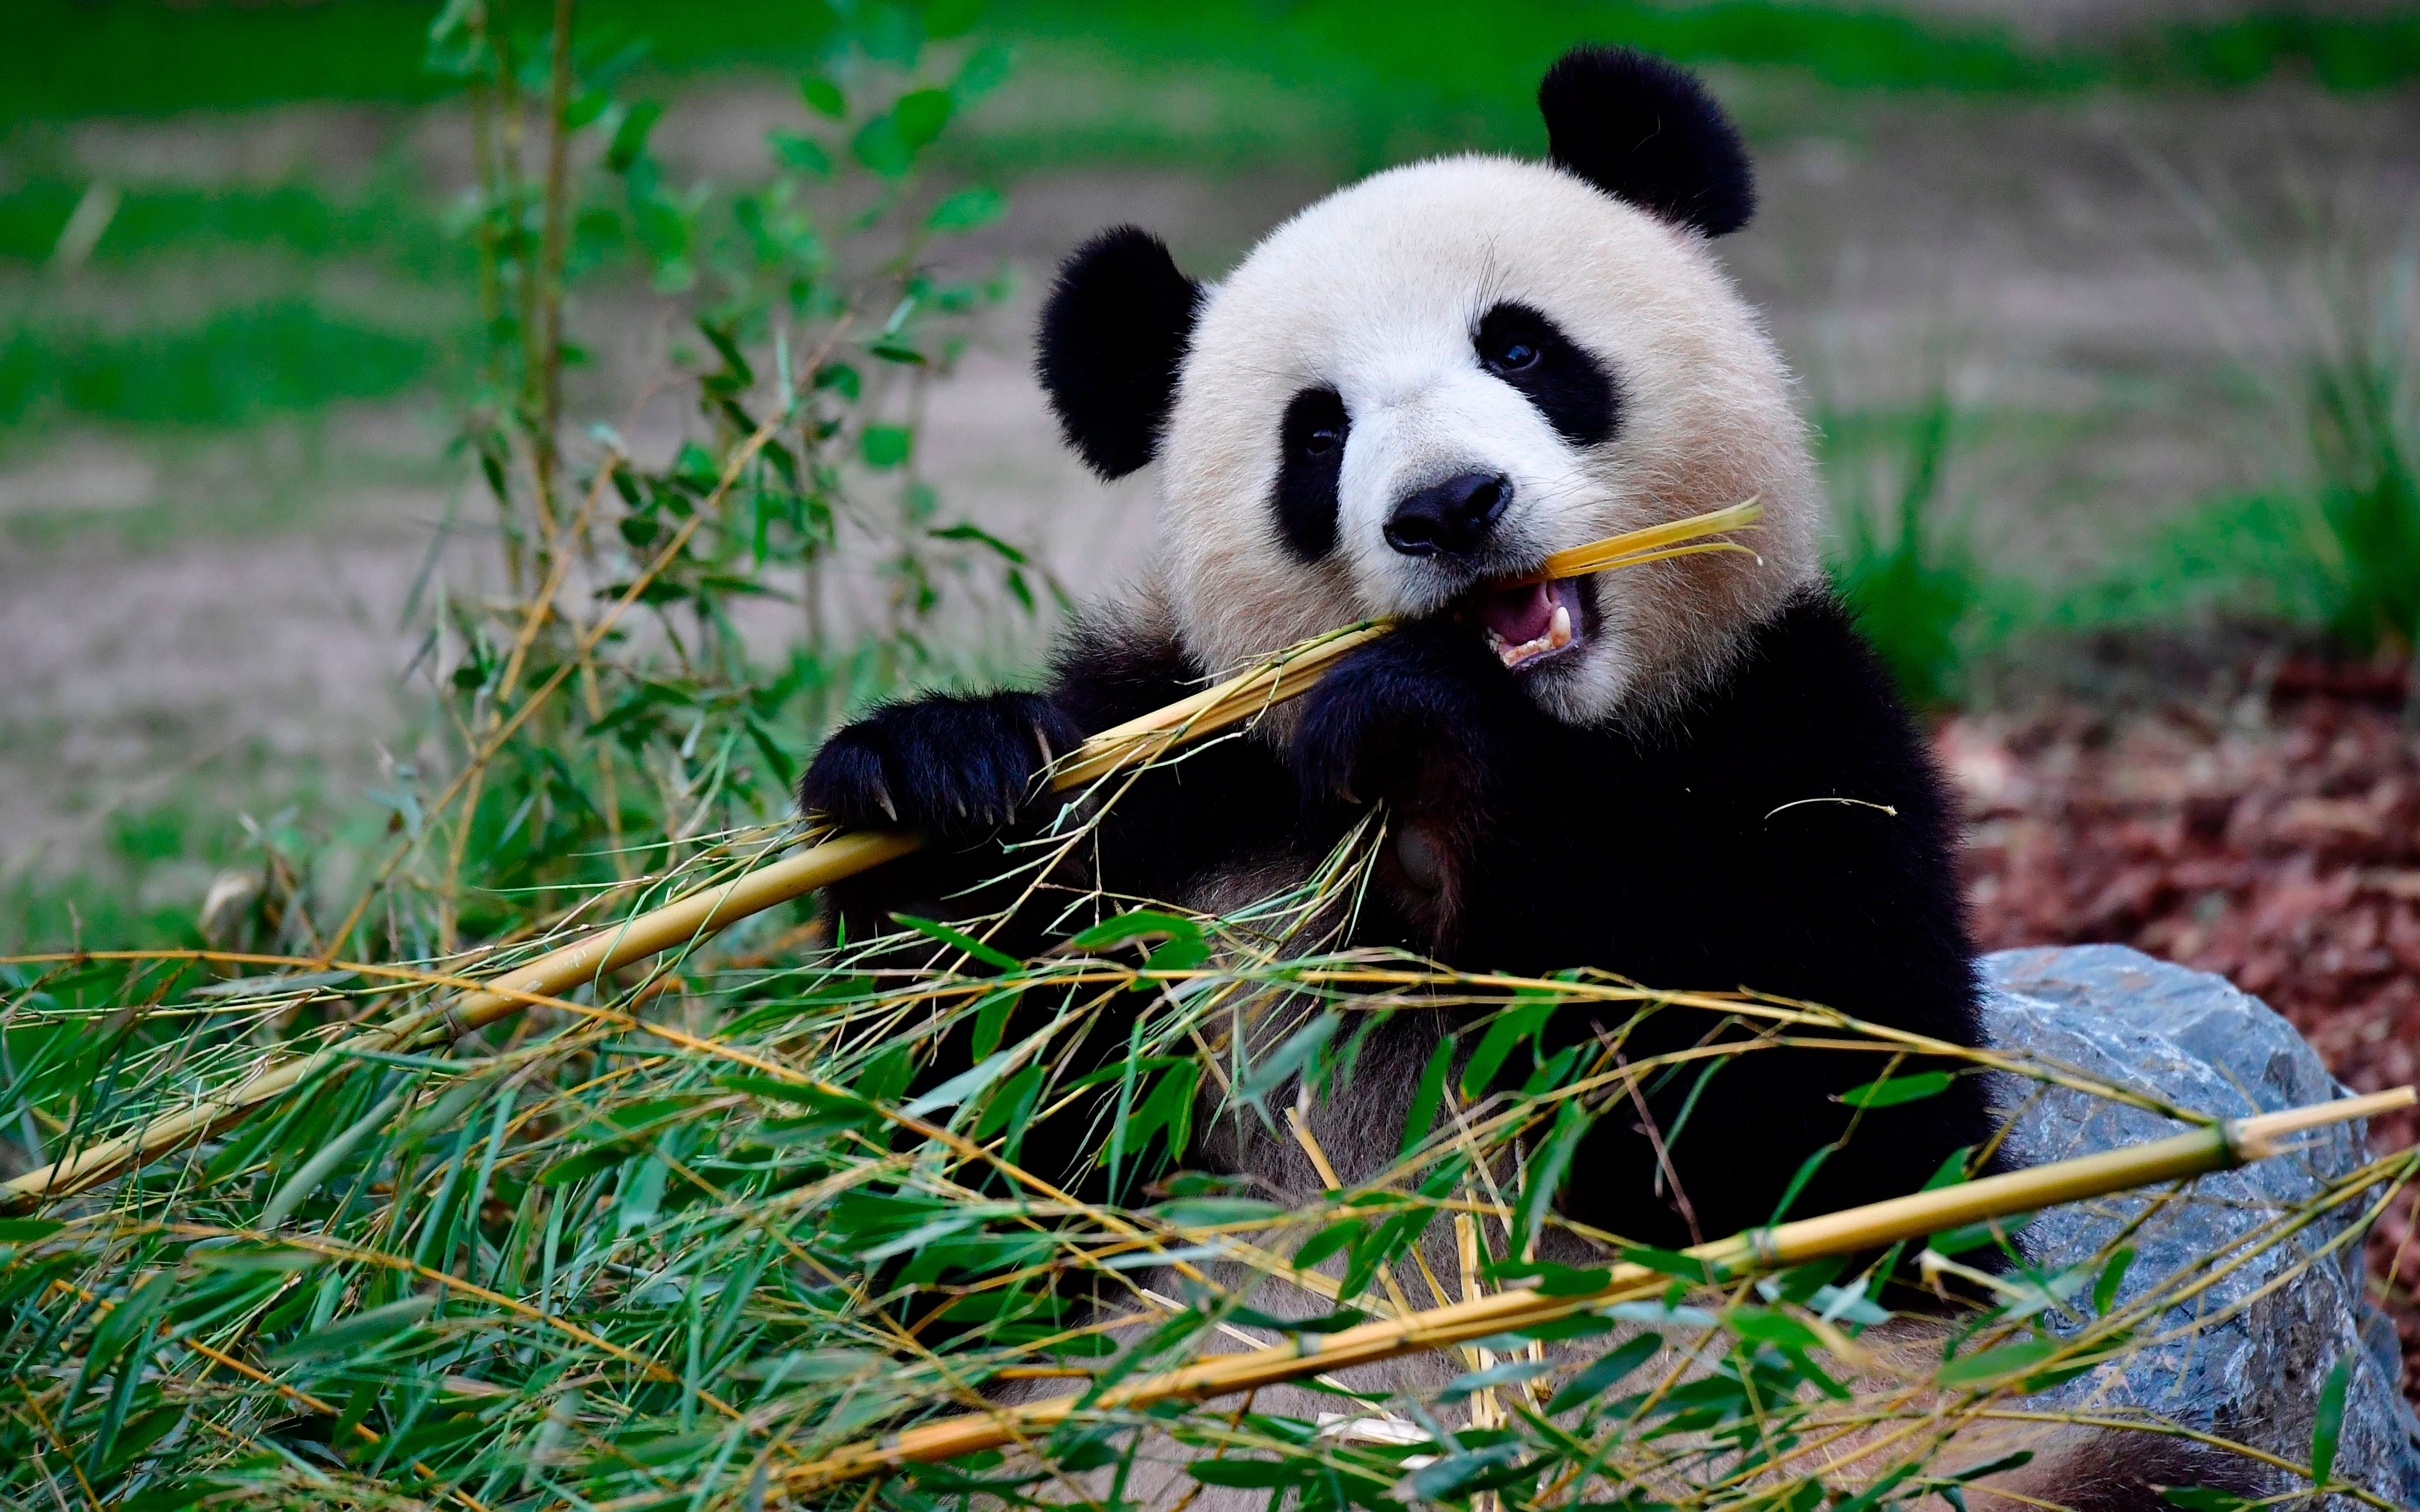 Modern pandas have teeth specialised for tearing apart bamboo stems. (Photo: TOBIAS SCHWARZ/AFP, Getty Images)